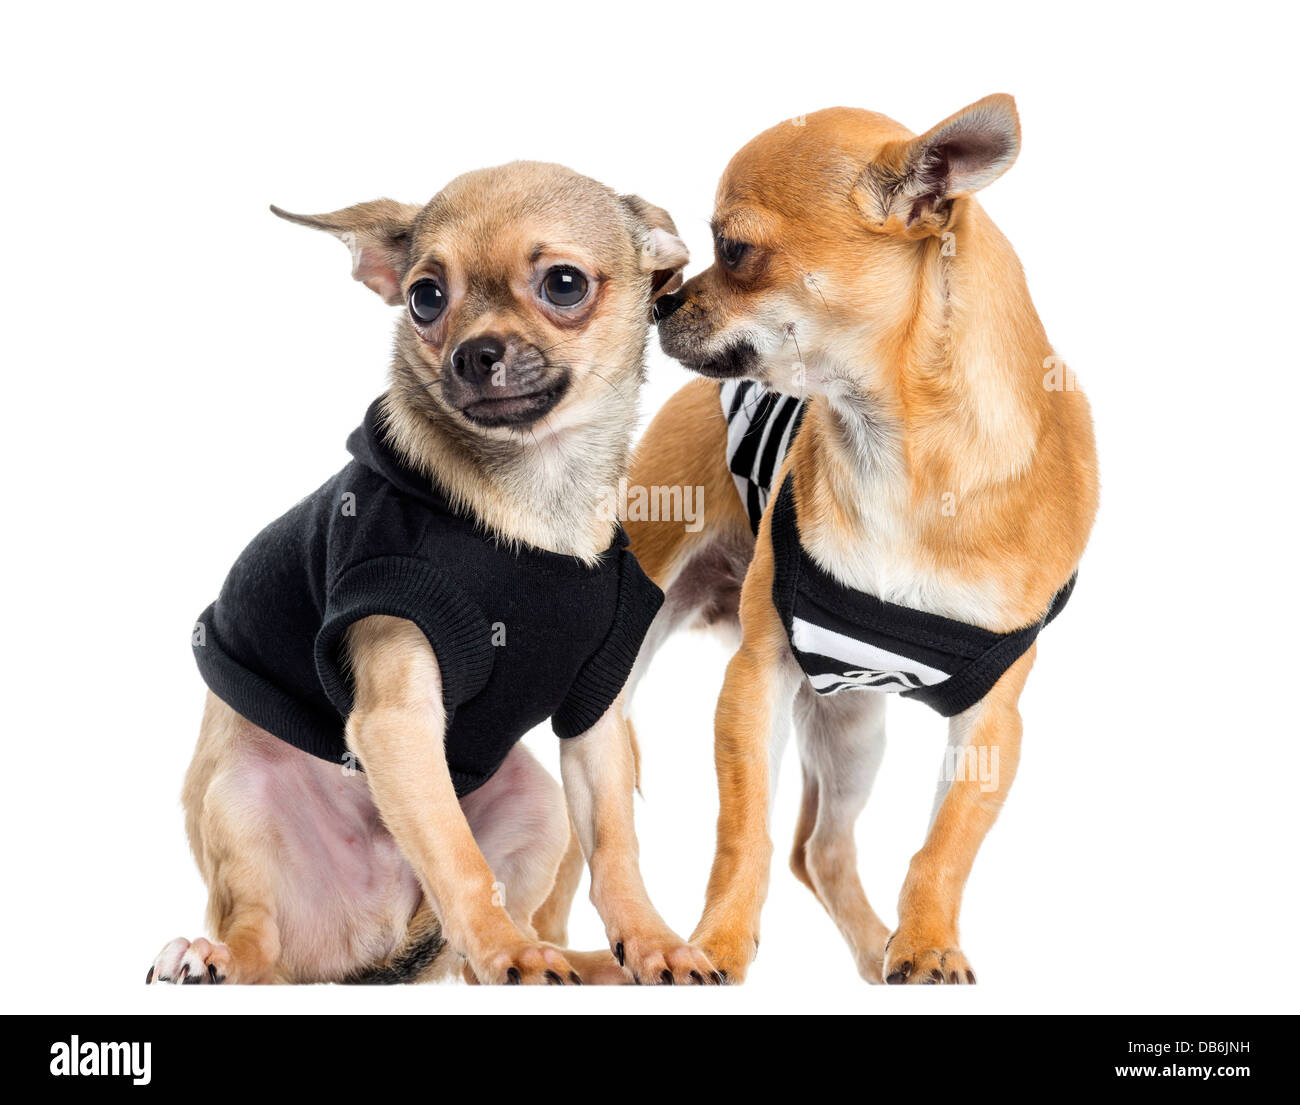 Deux Chihuahuas dressed up against white background Banque D'Images